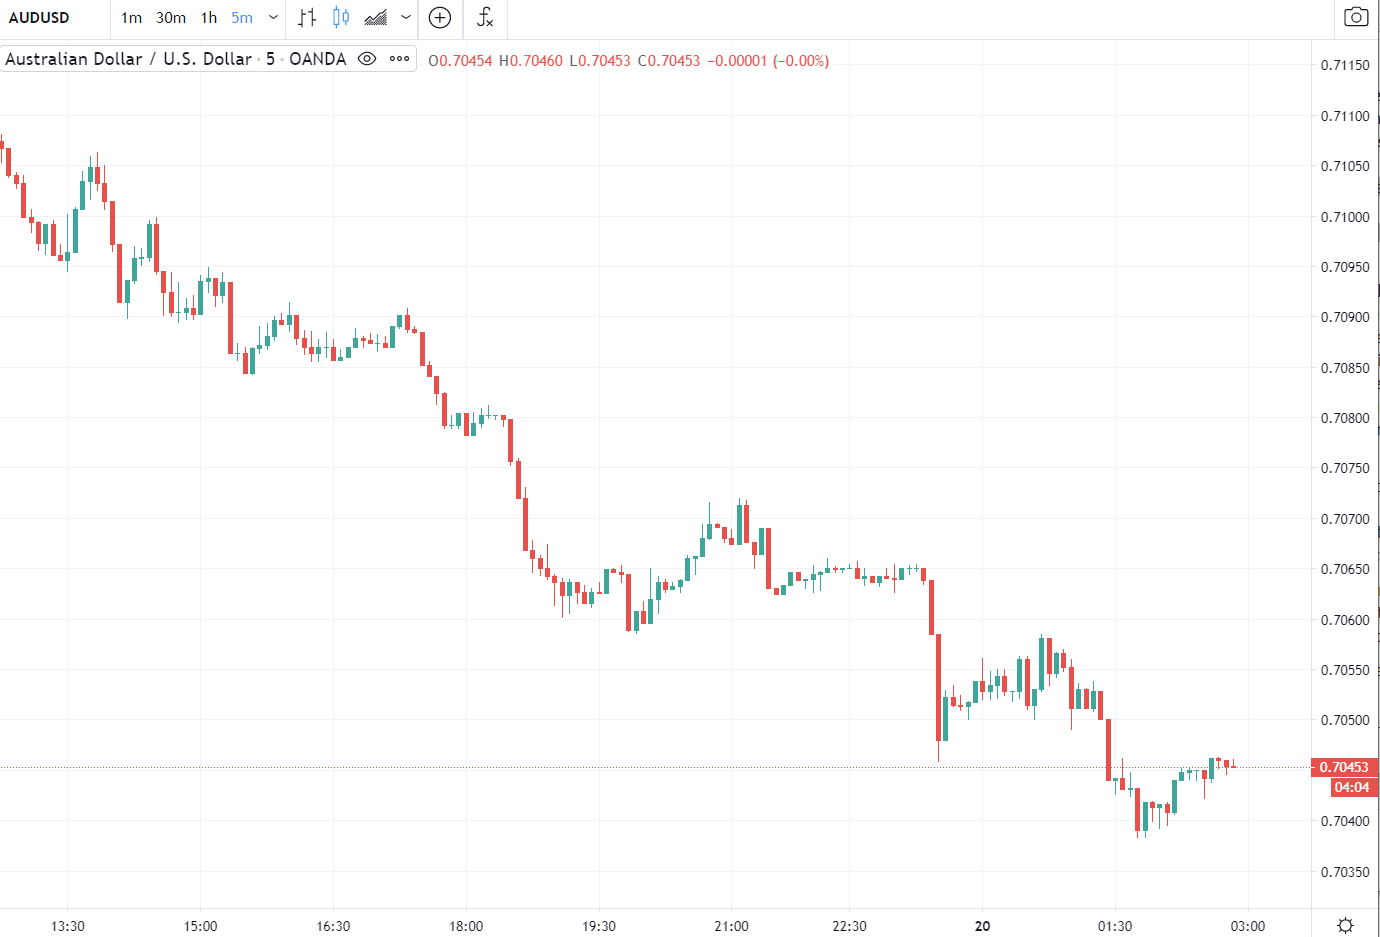 Forex news for Asia tradingfor Tuesday 20October 2020 